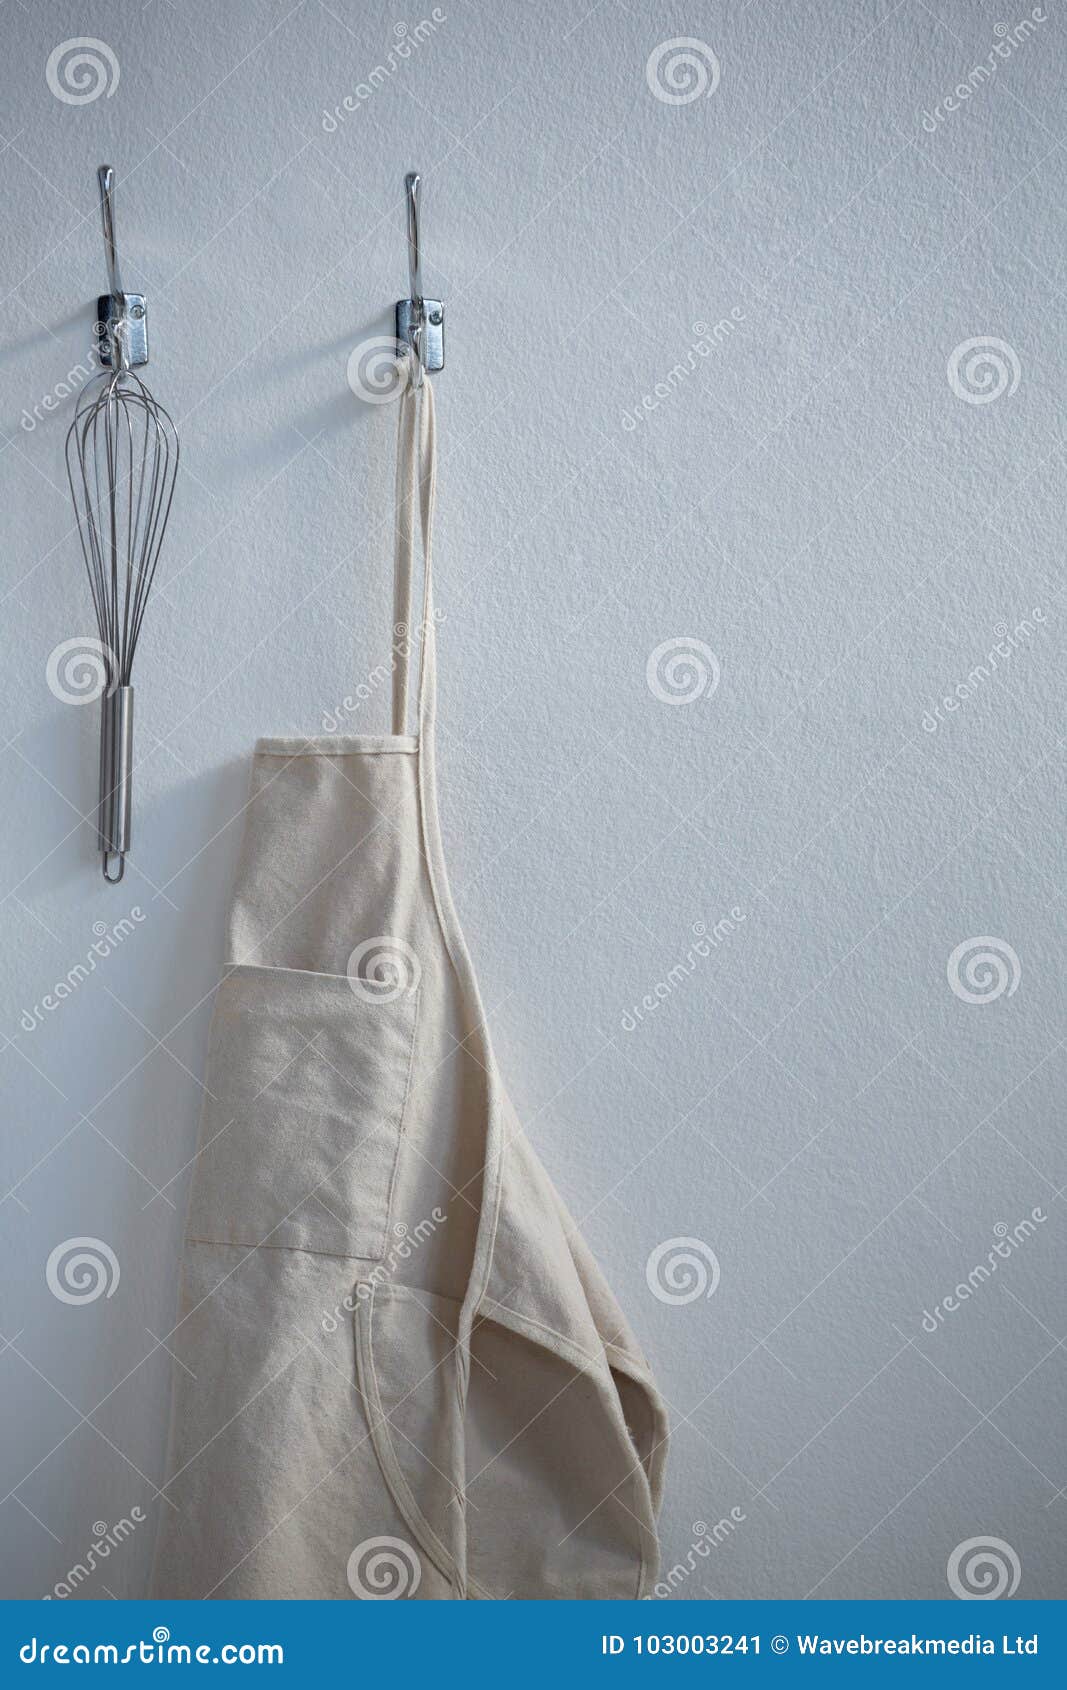 apron and whisker hanging on hook